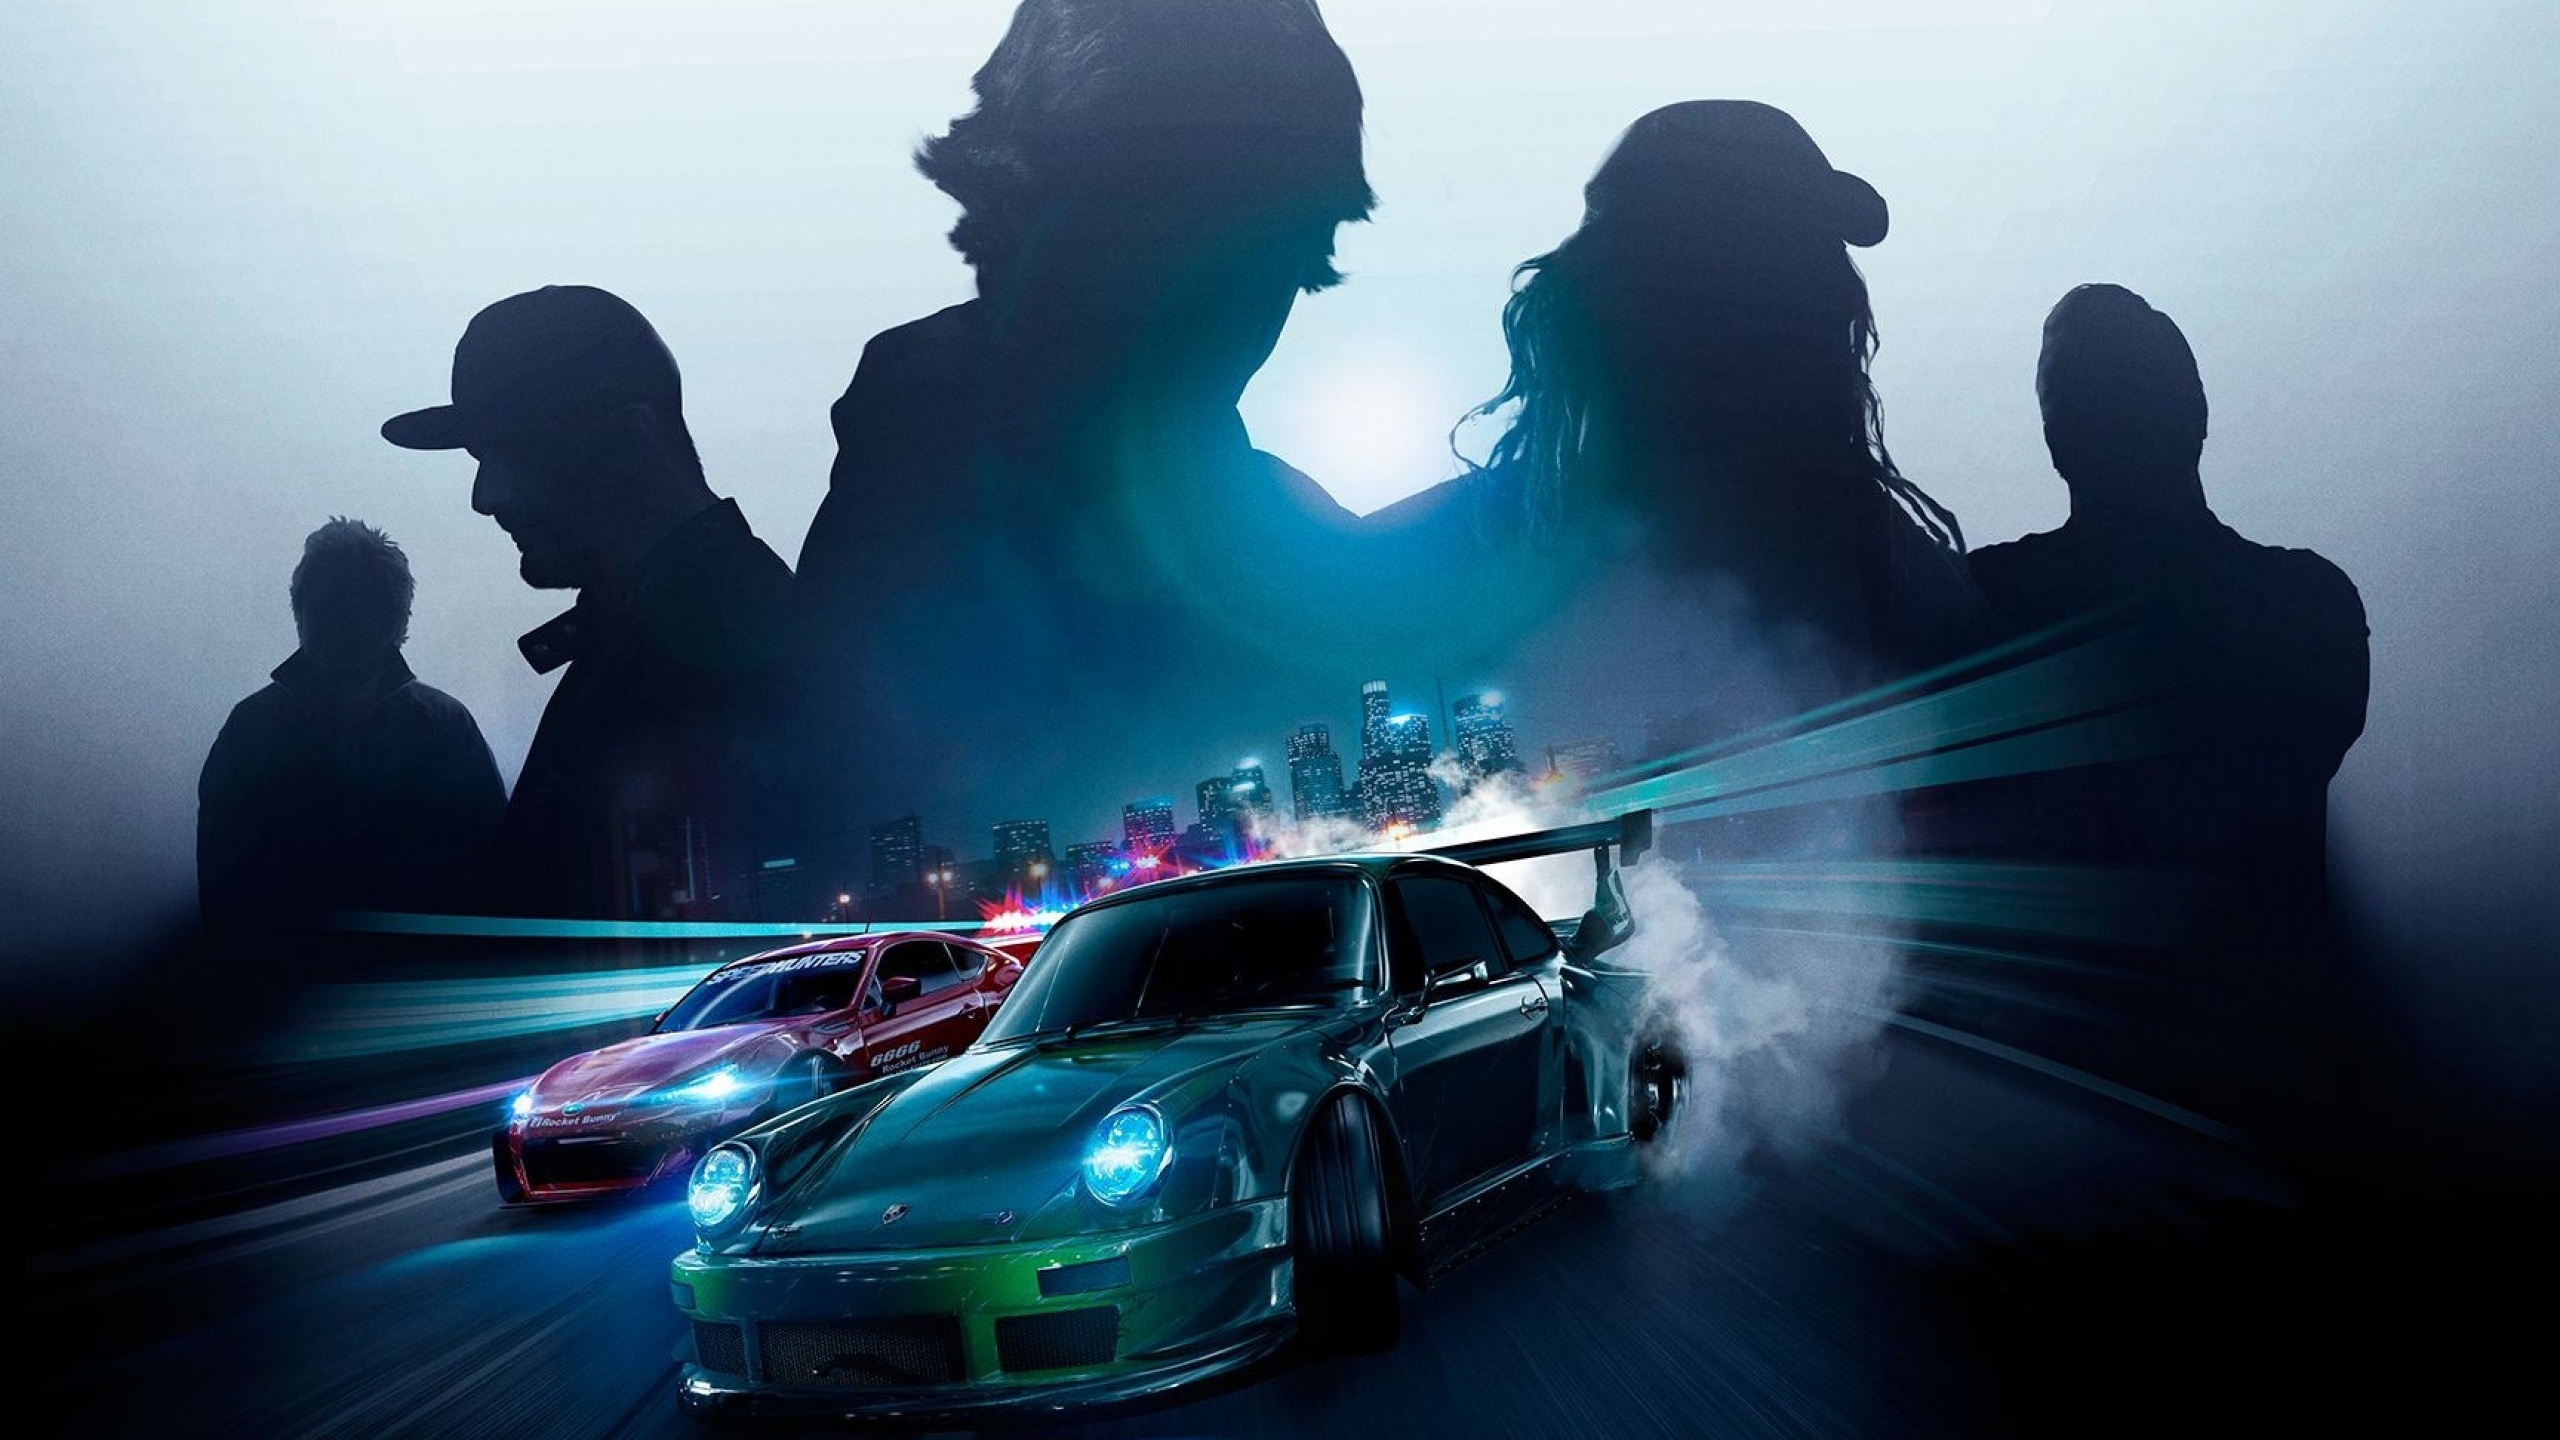 Need For Speed Poster for 2560x1440 HDTV resolution